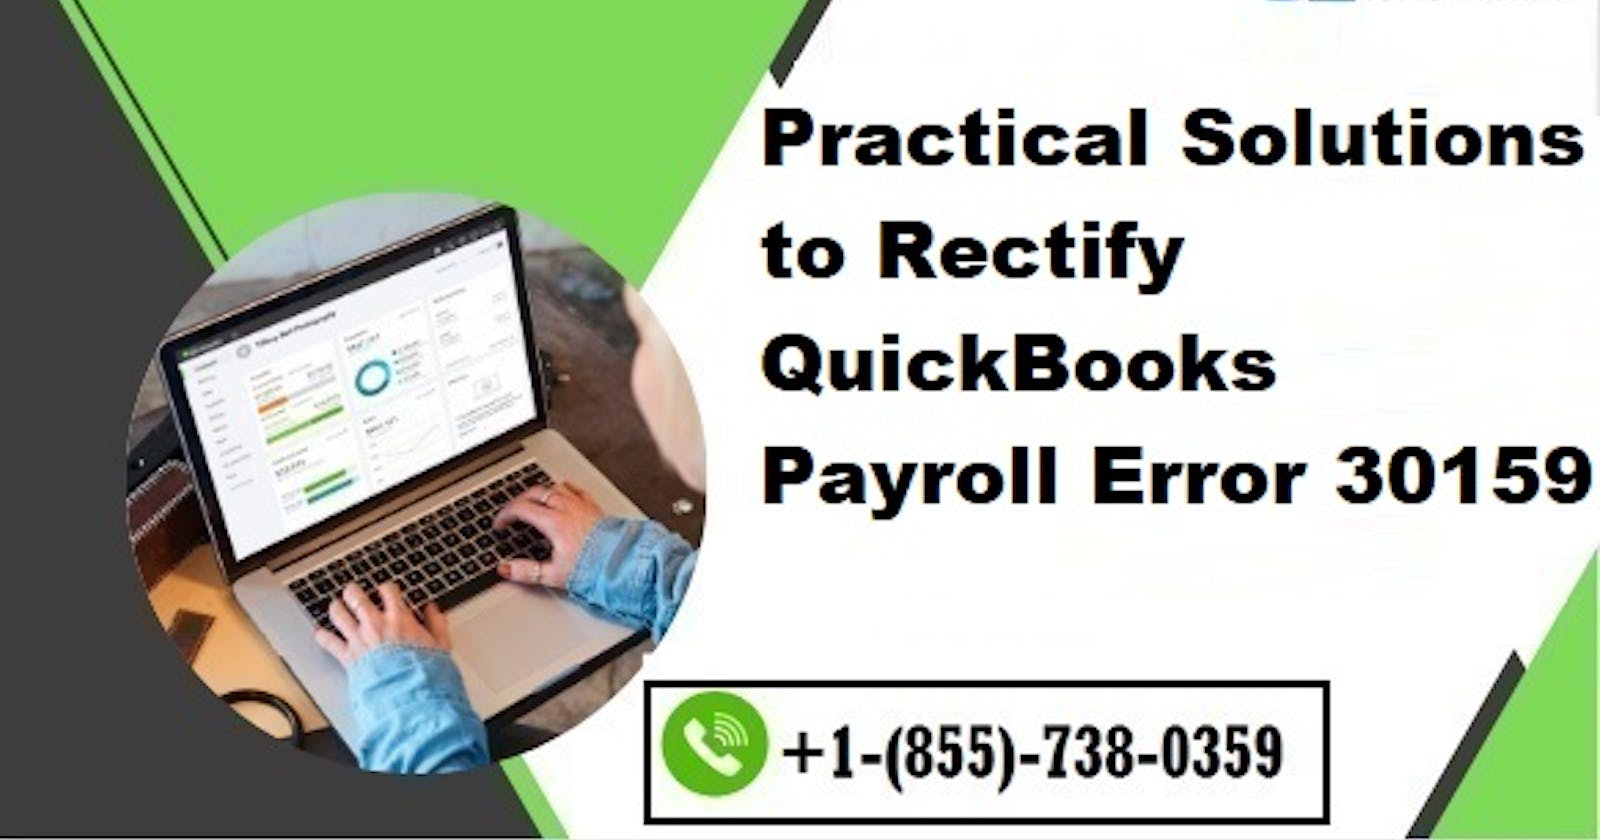 Practical Solutions to Rectify QuickBooks Payroll Error 30159